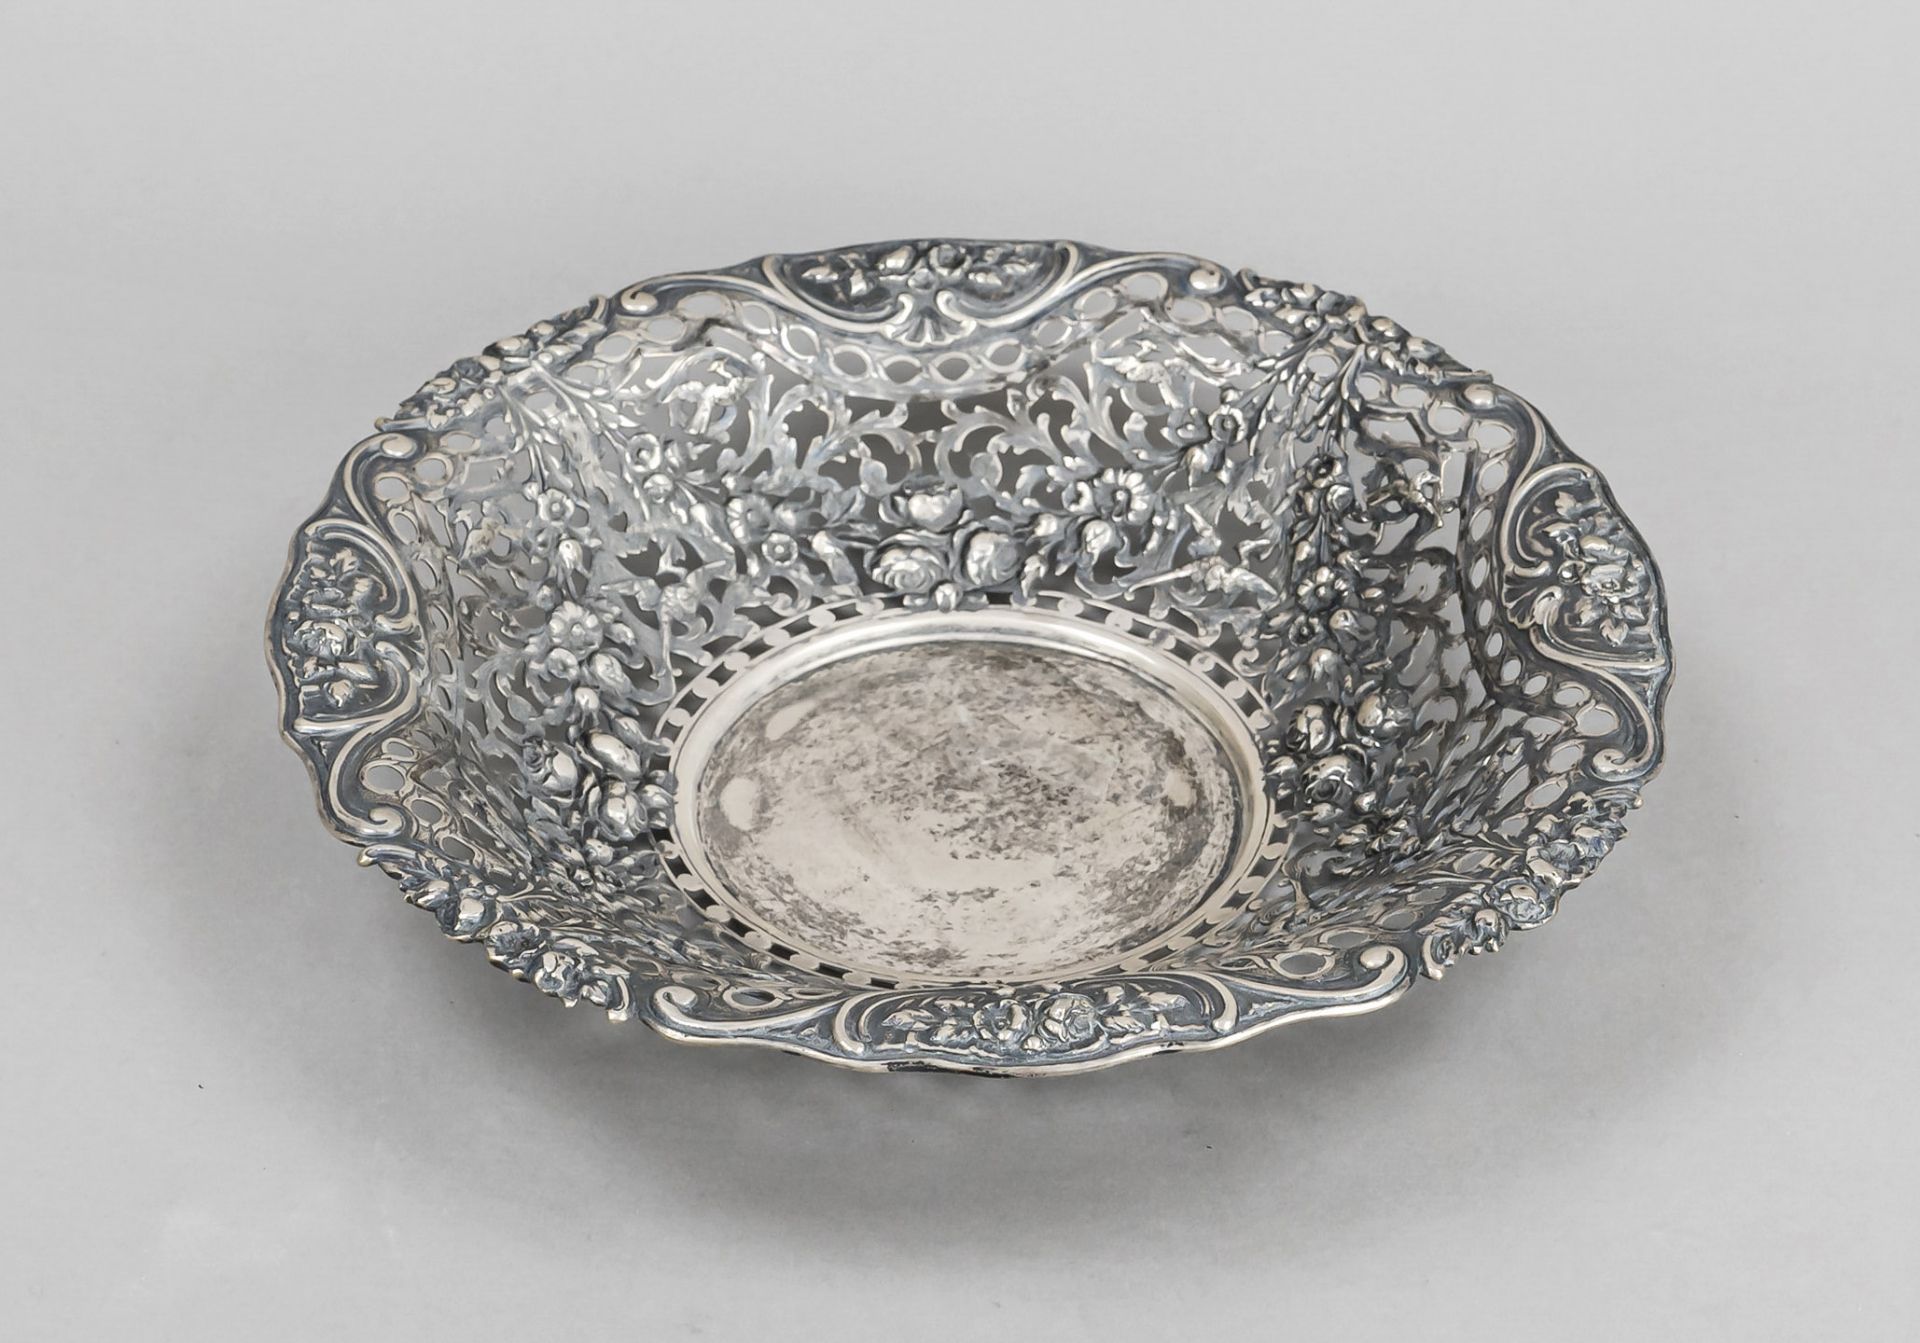 A round openwork basket, German, 20th century, probably Hanau, silver 800/000, fitted curved rim,